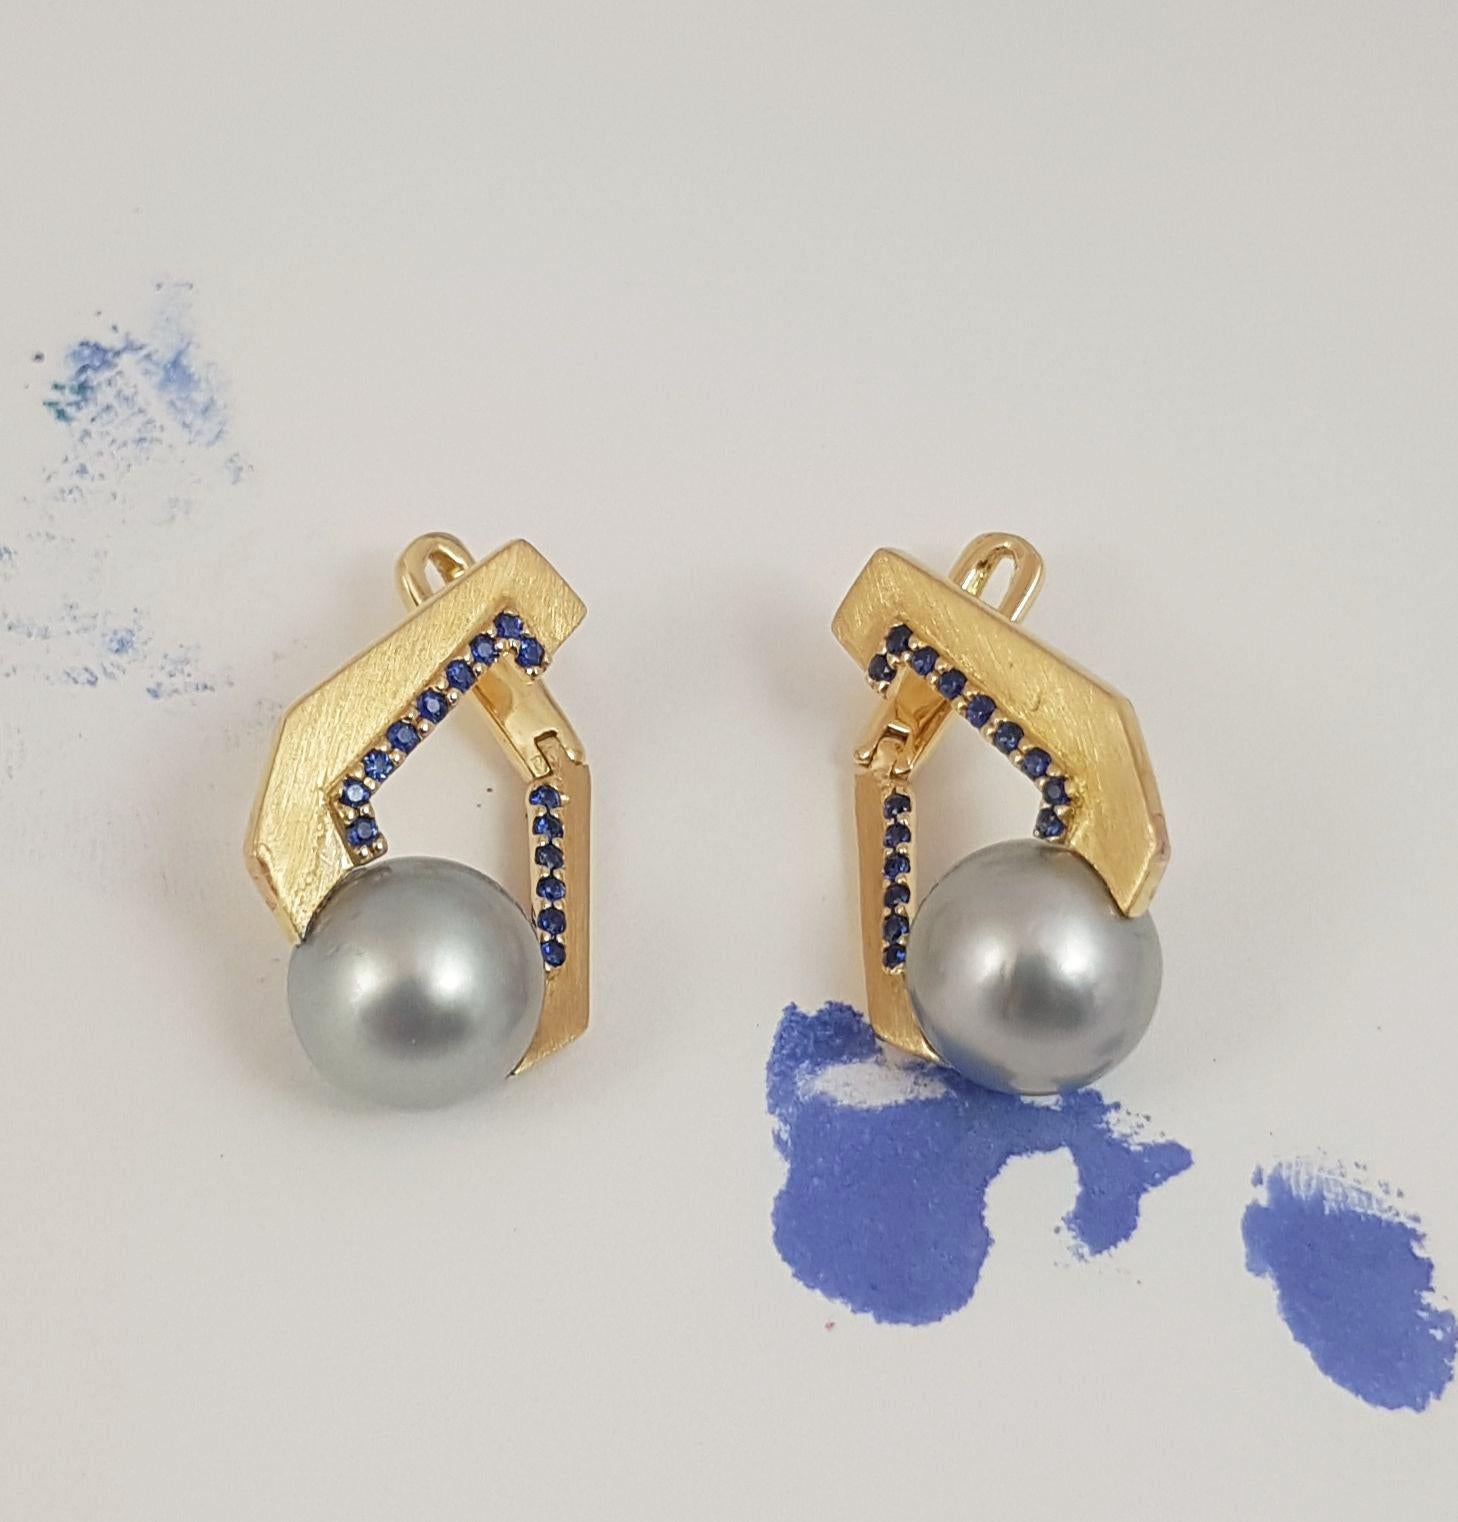 Brilliant Cut Origami Link no. 5 South Sea Pearl with Blue Sapphire Earrings set in 18K Gold